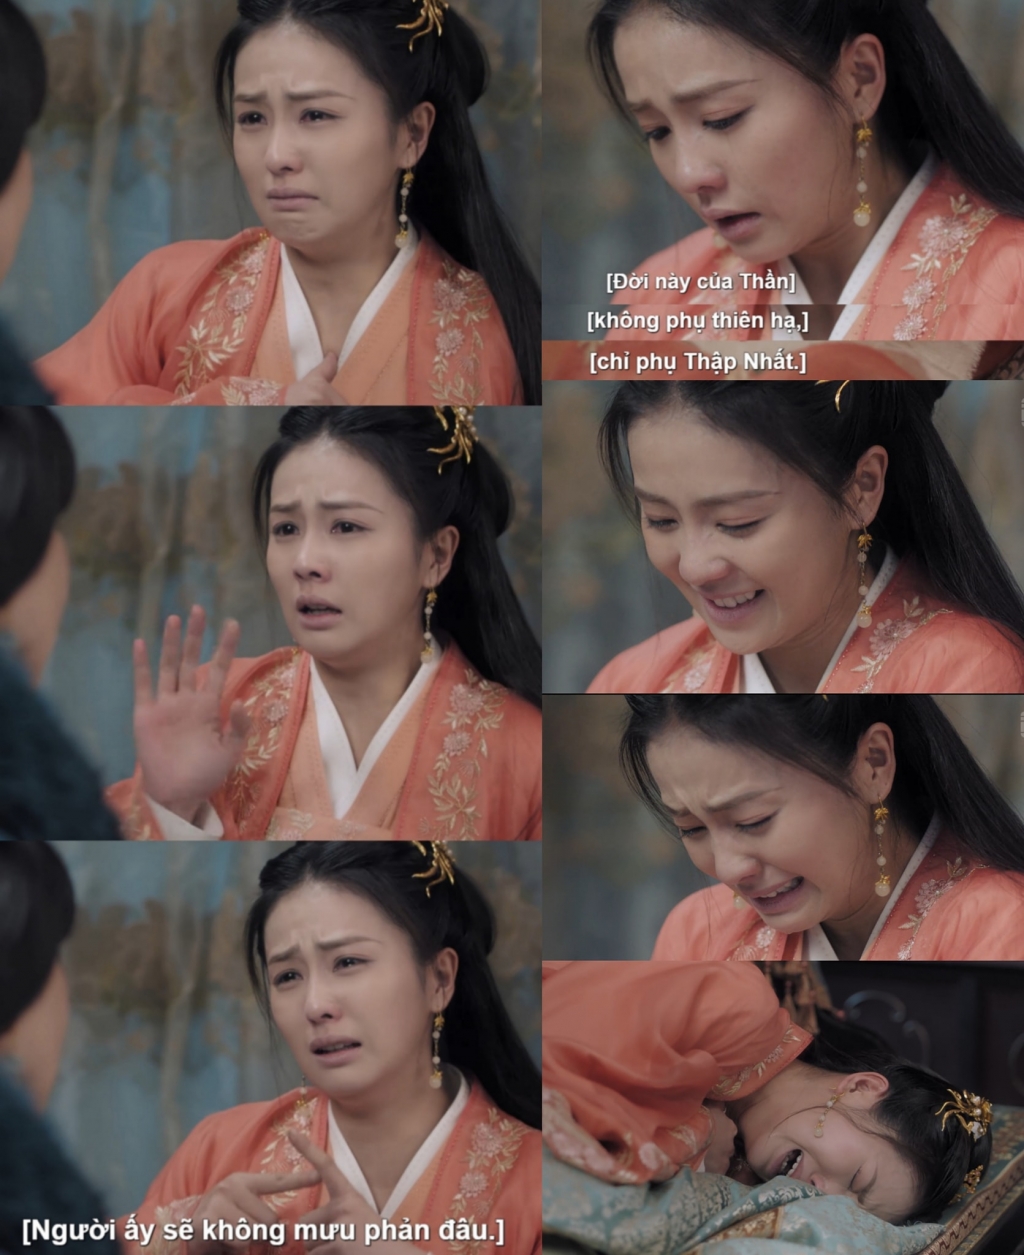 With Bạch Lộc\'s secret to crying like rain and Châu Sinh Như Cố\'s exceptional acting skills, this crying scene will leave you emotionally overwhelmed. You will be left in awe and tears as you see the powerful emotions captured on screen. Don\'t miss out on this tear-jerking scene.